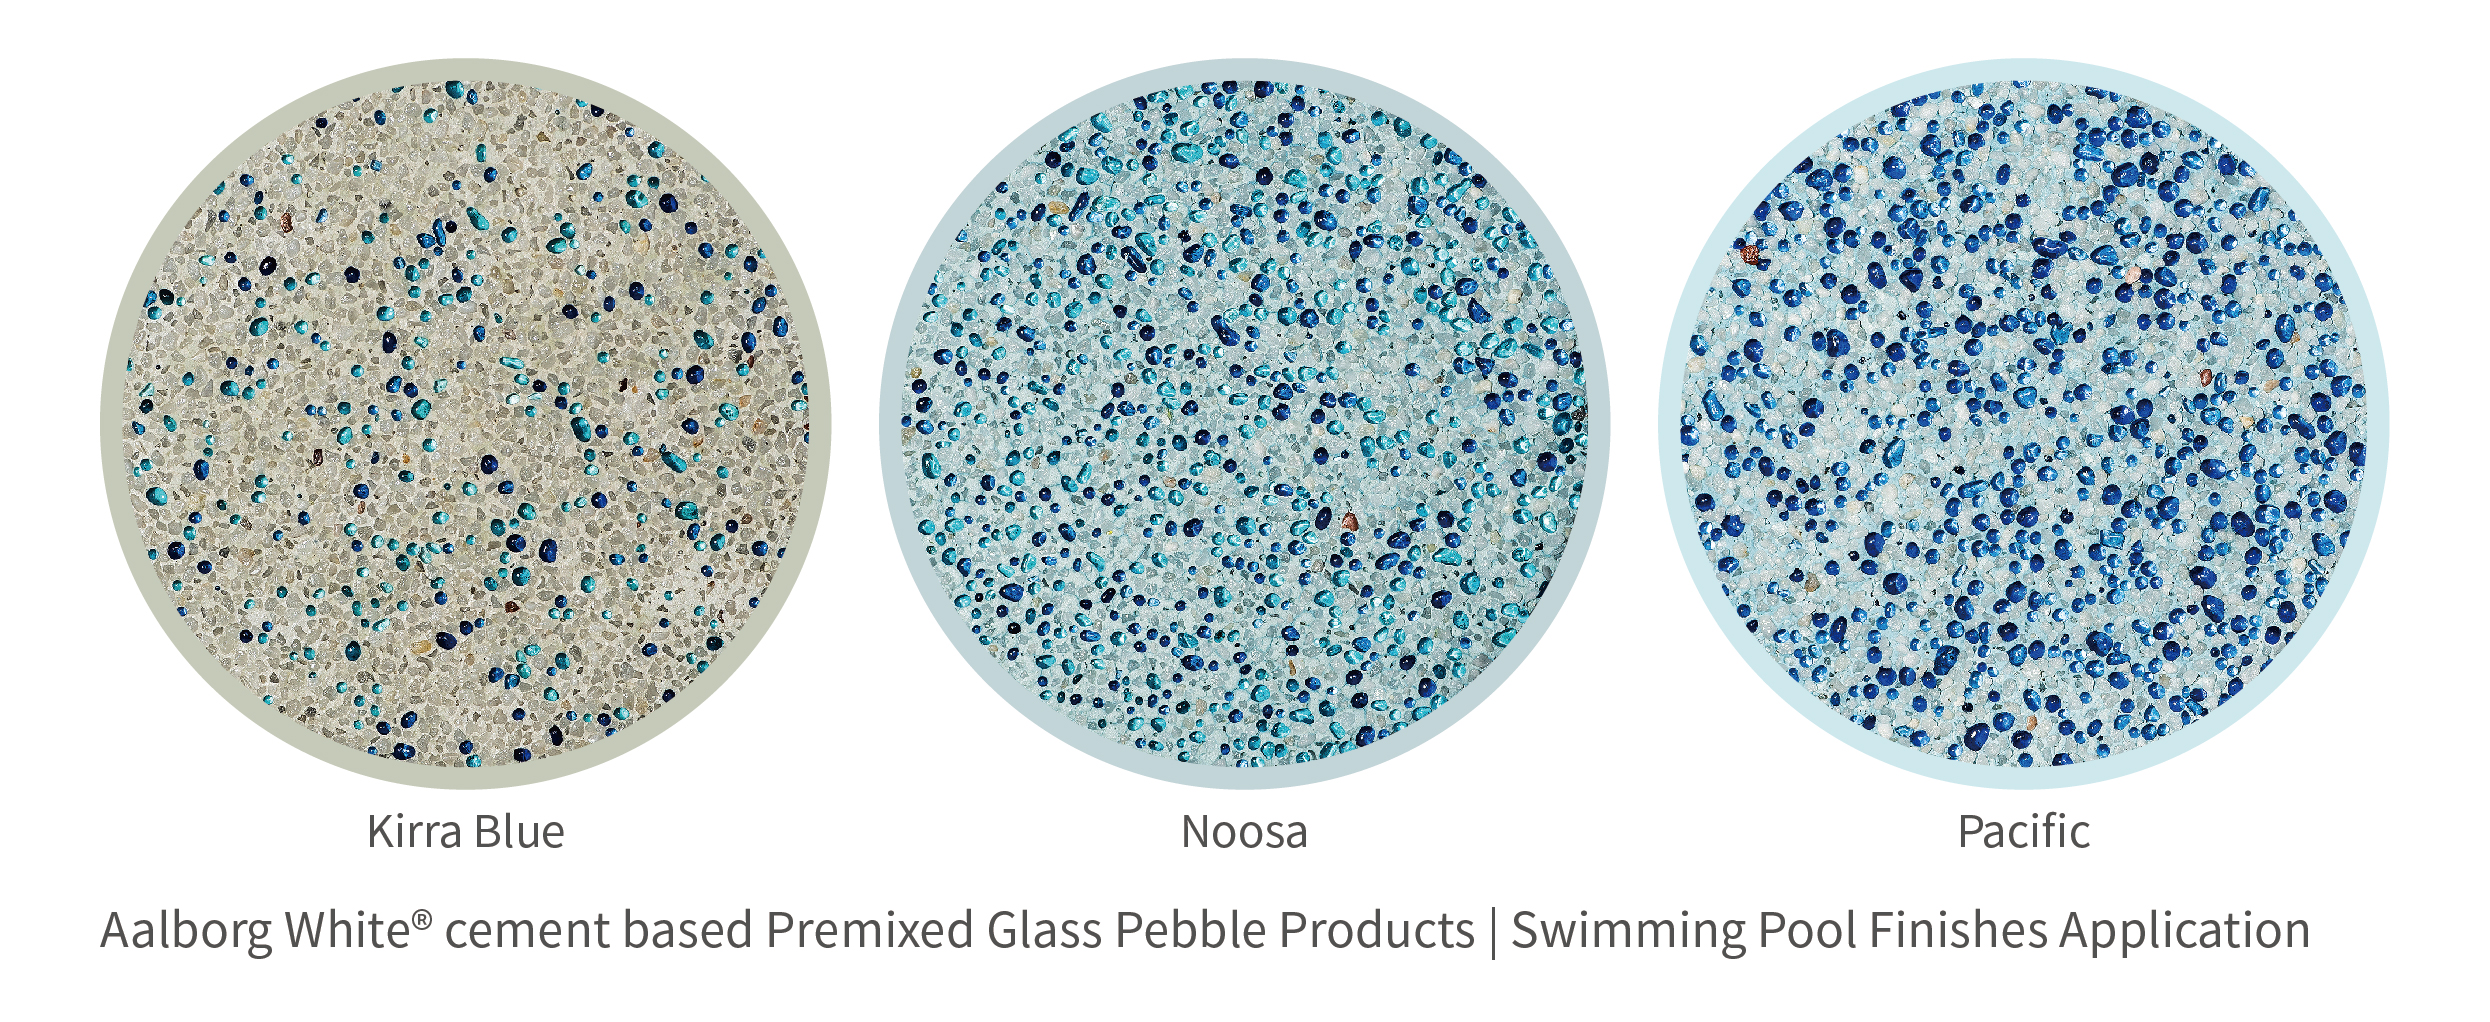 Premixed pool finishes products